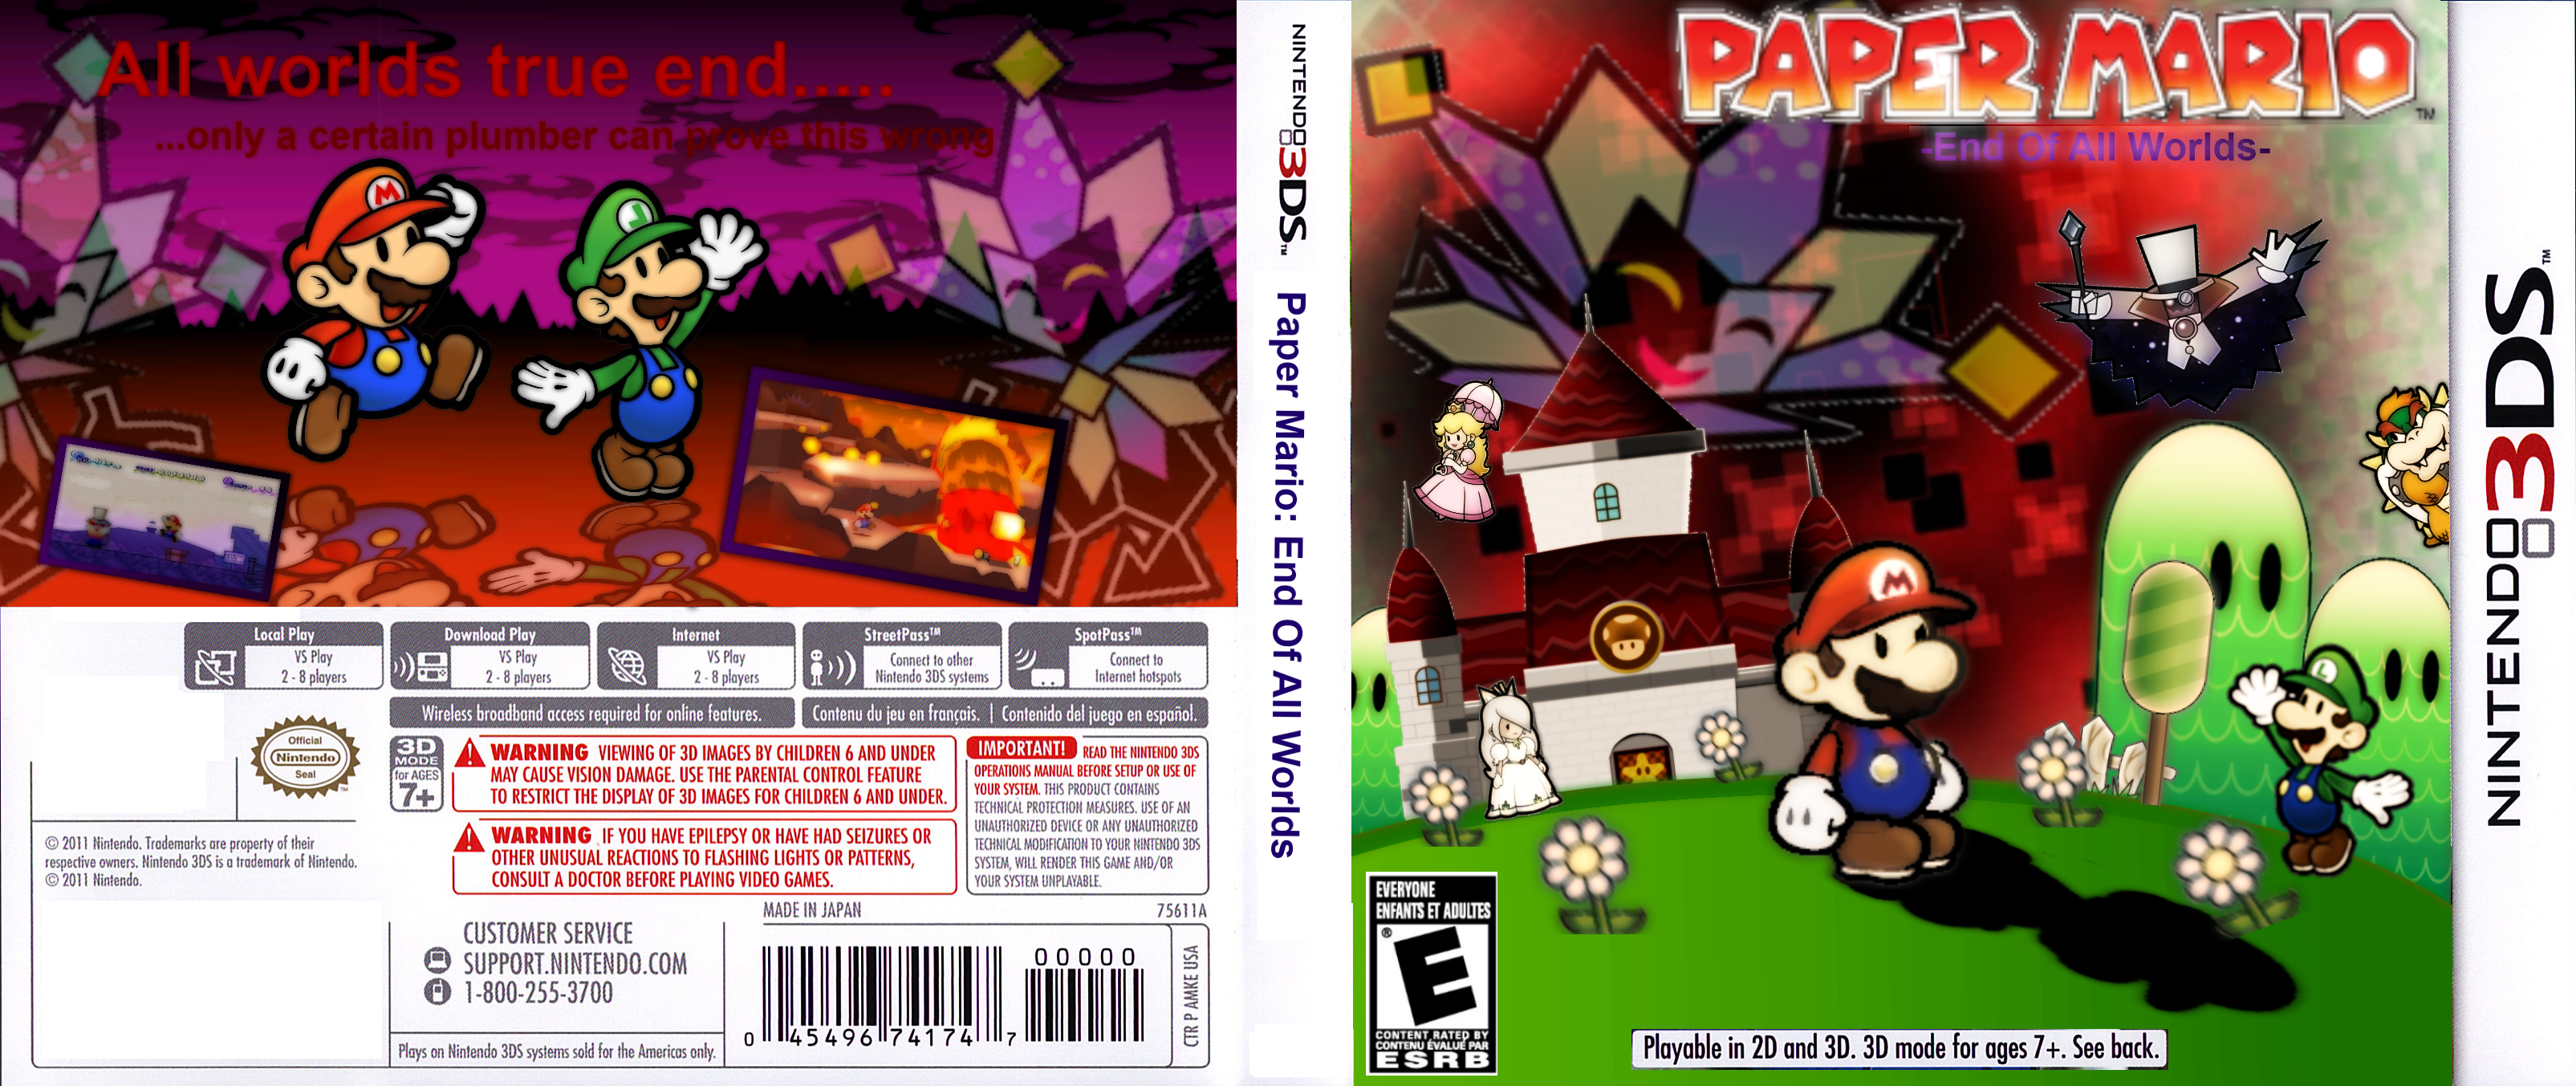 Paper Mario: End Of All Worlds box cover